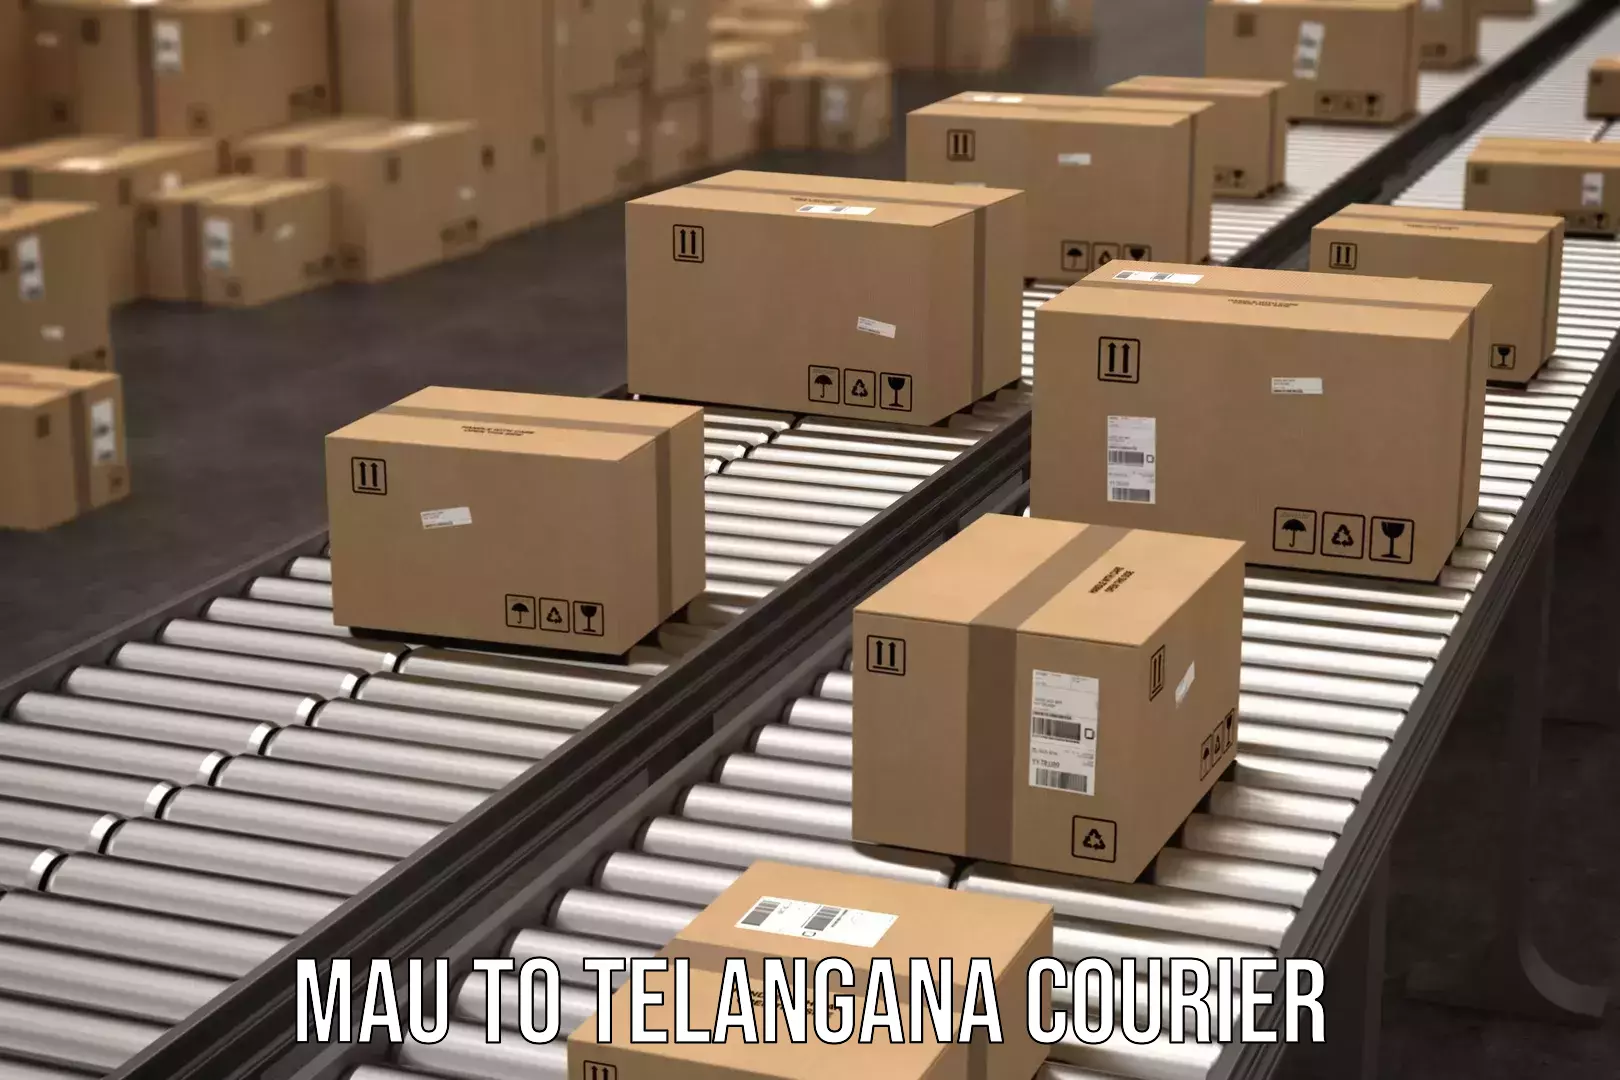 Online package tracking in Mau to Balanagar